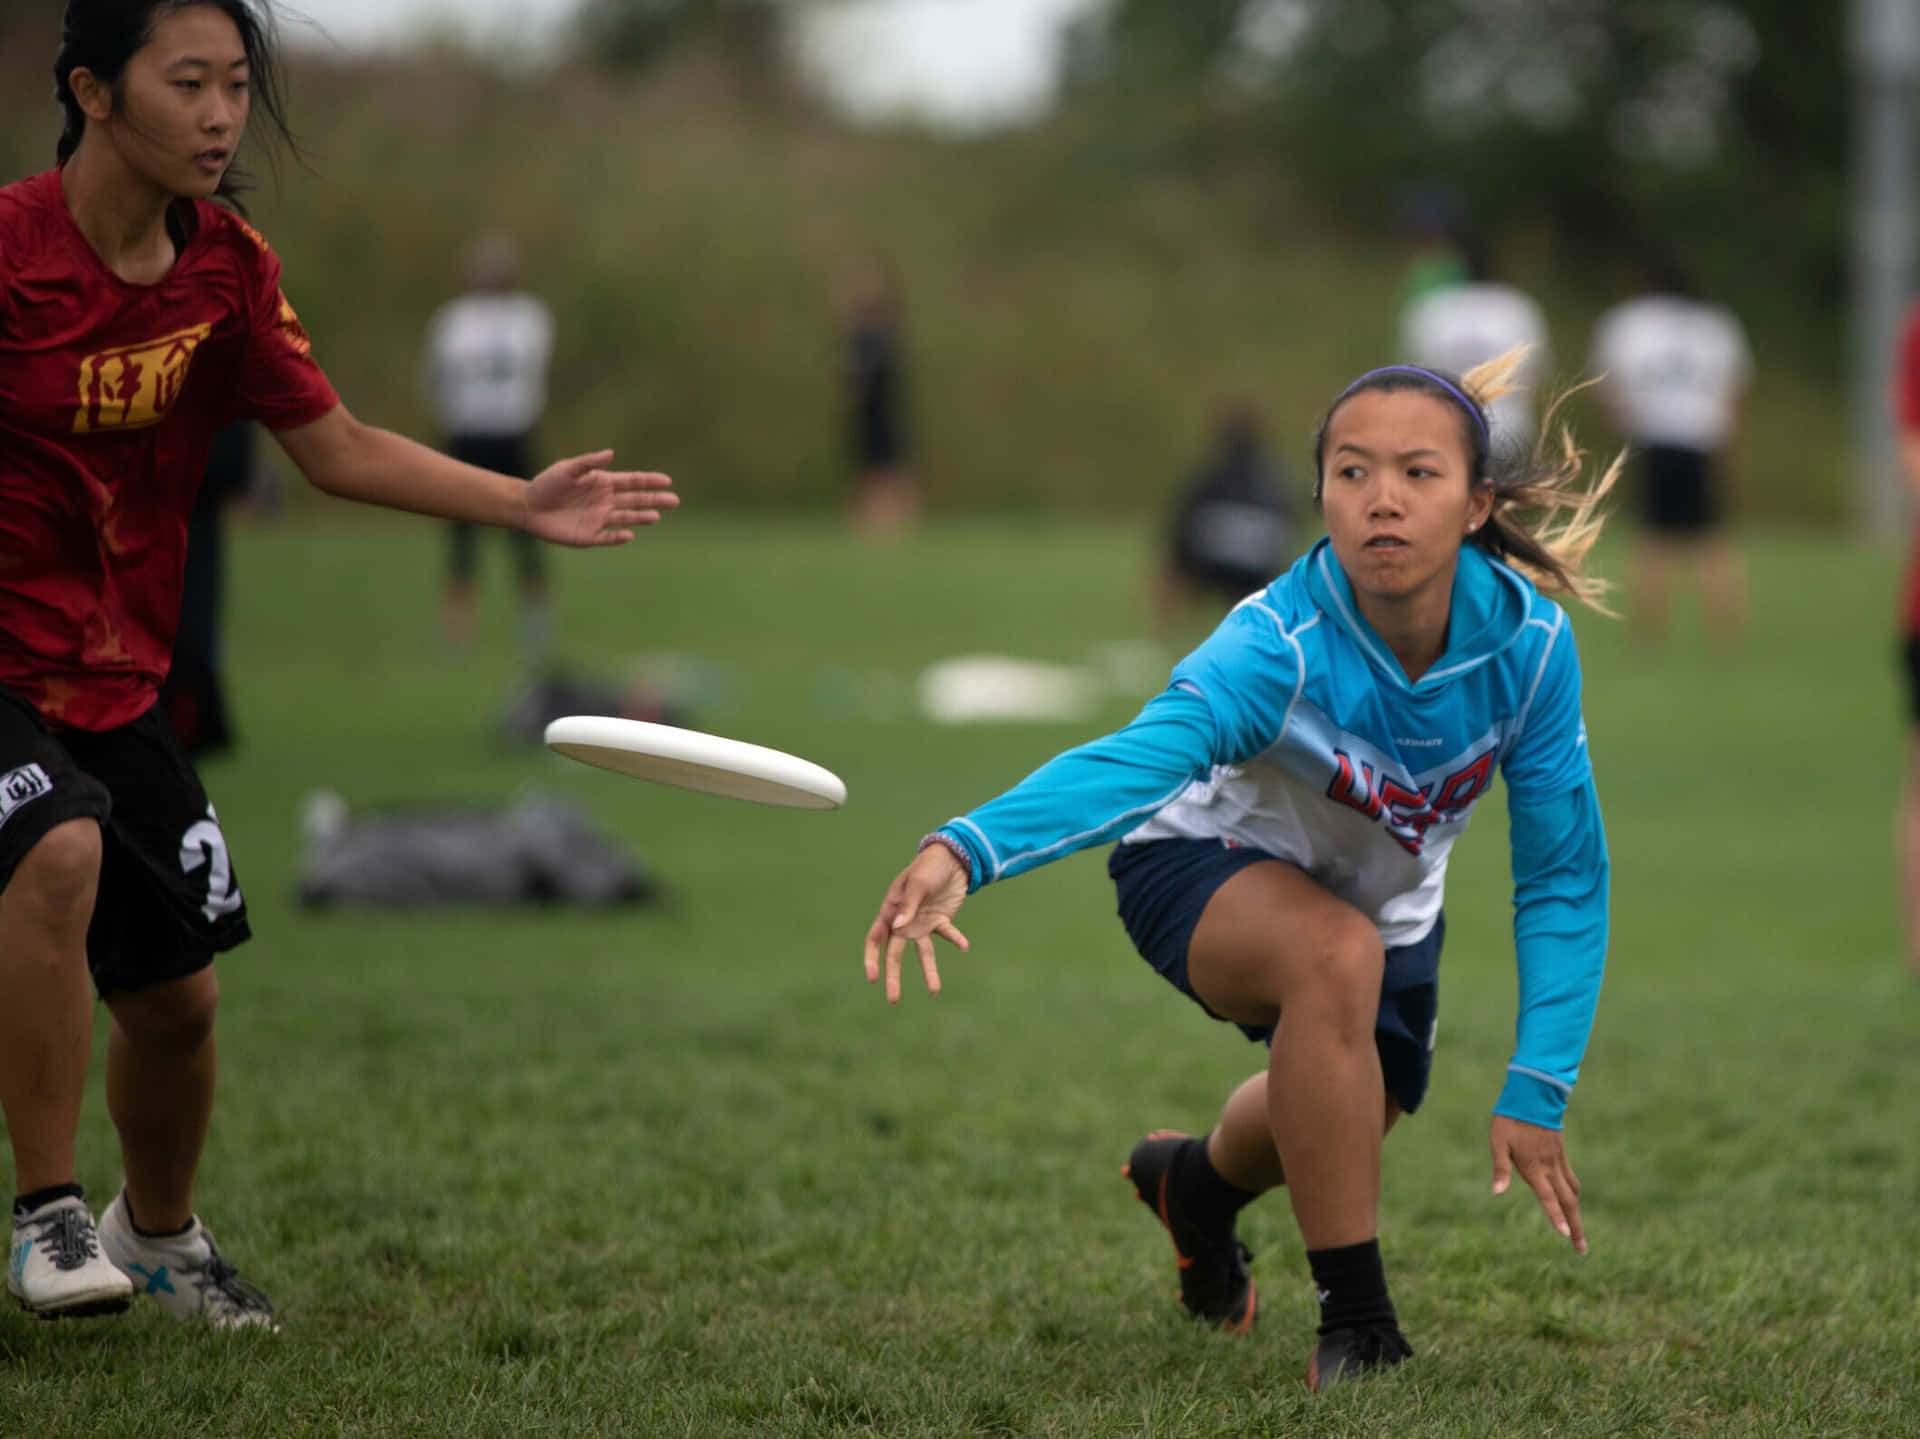 Girl Team USA 1080p Ultimate Frisbee Background